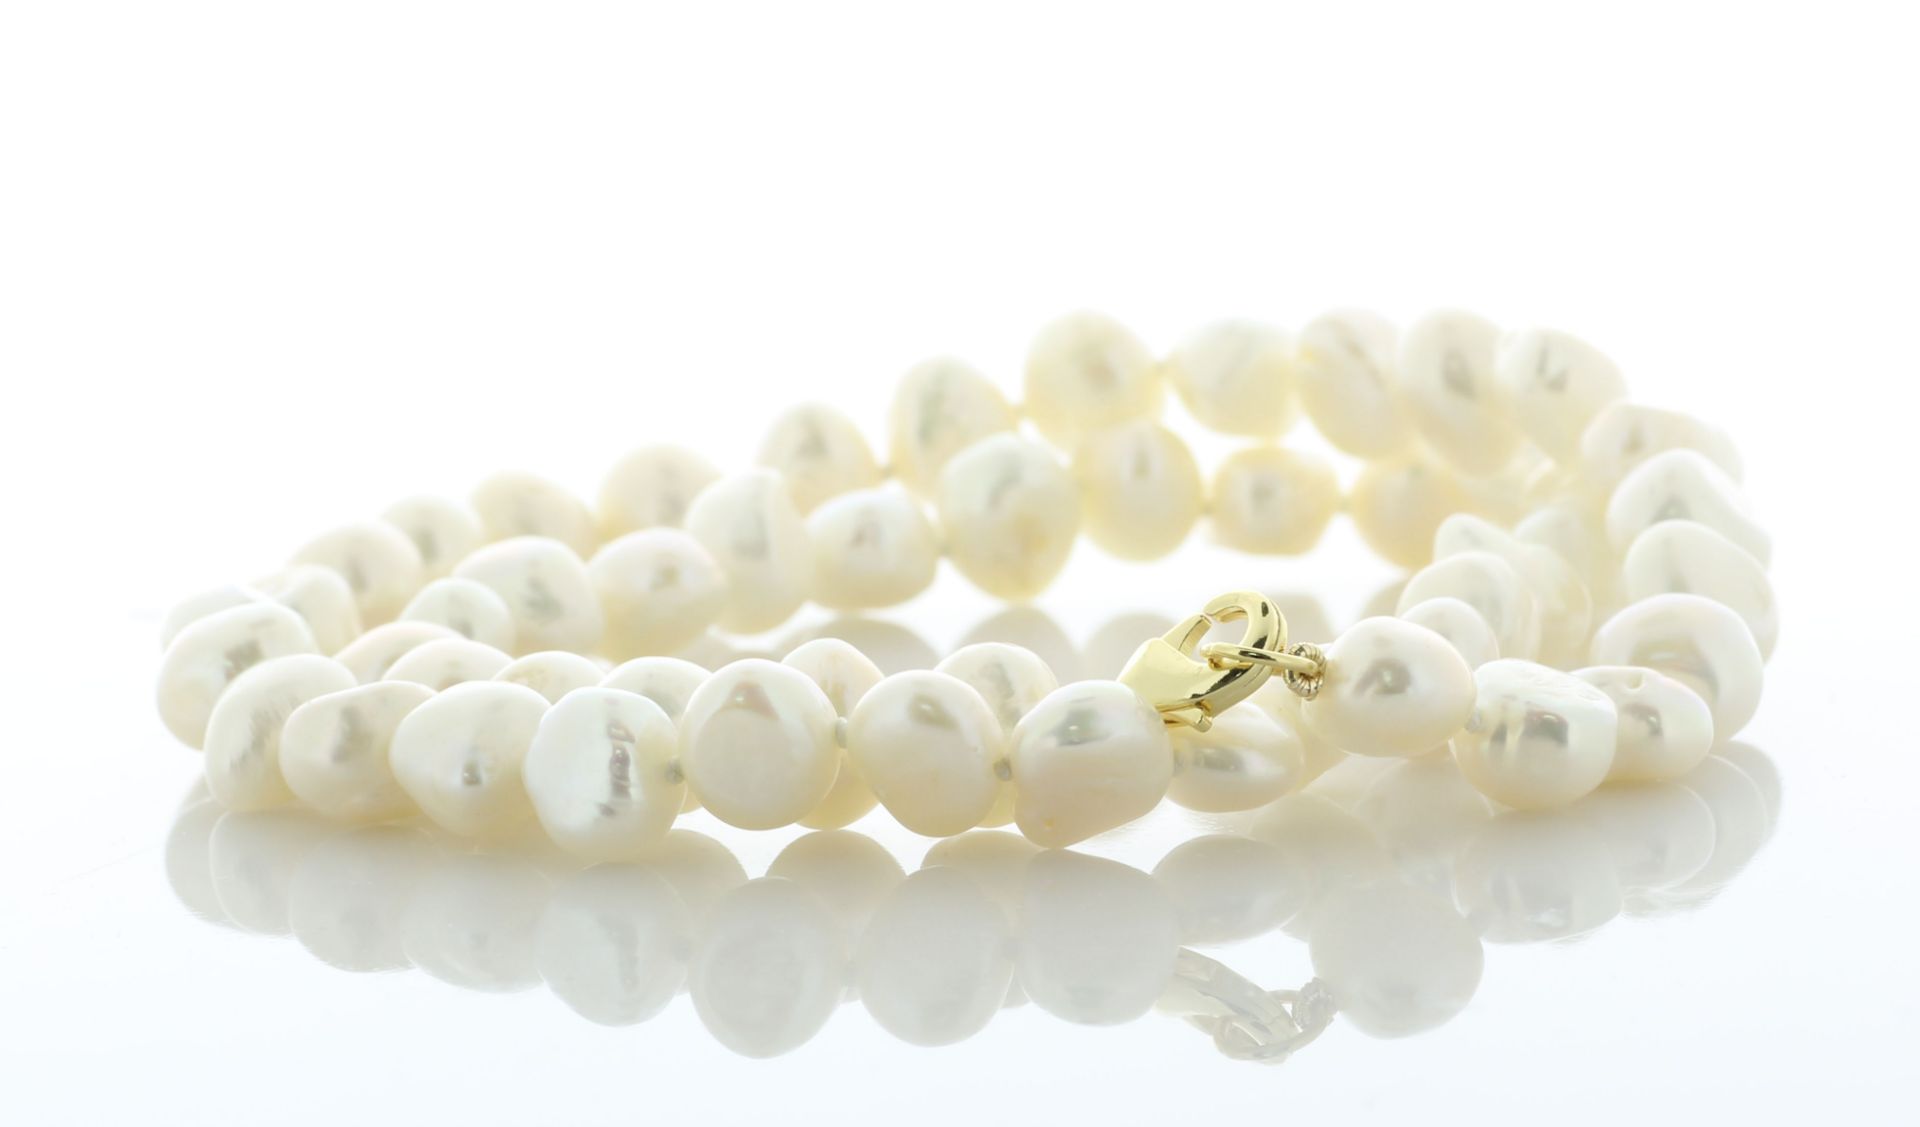 18 Inch Freshwater Cultured 8.0 - 8.5mm Pearl Necklace With Gold Plated Clasp - Valued By AGI £280. - Image 3 of 4